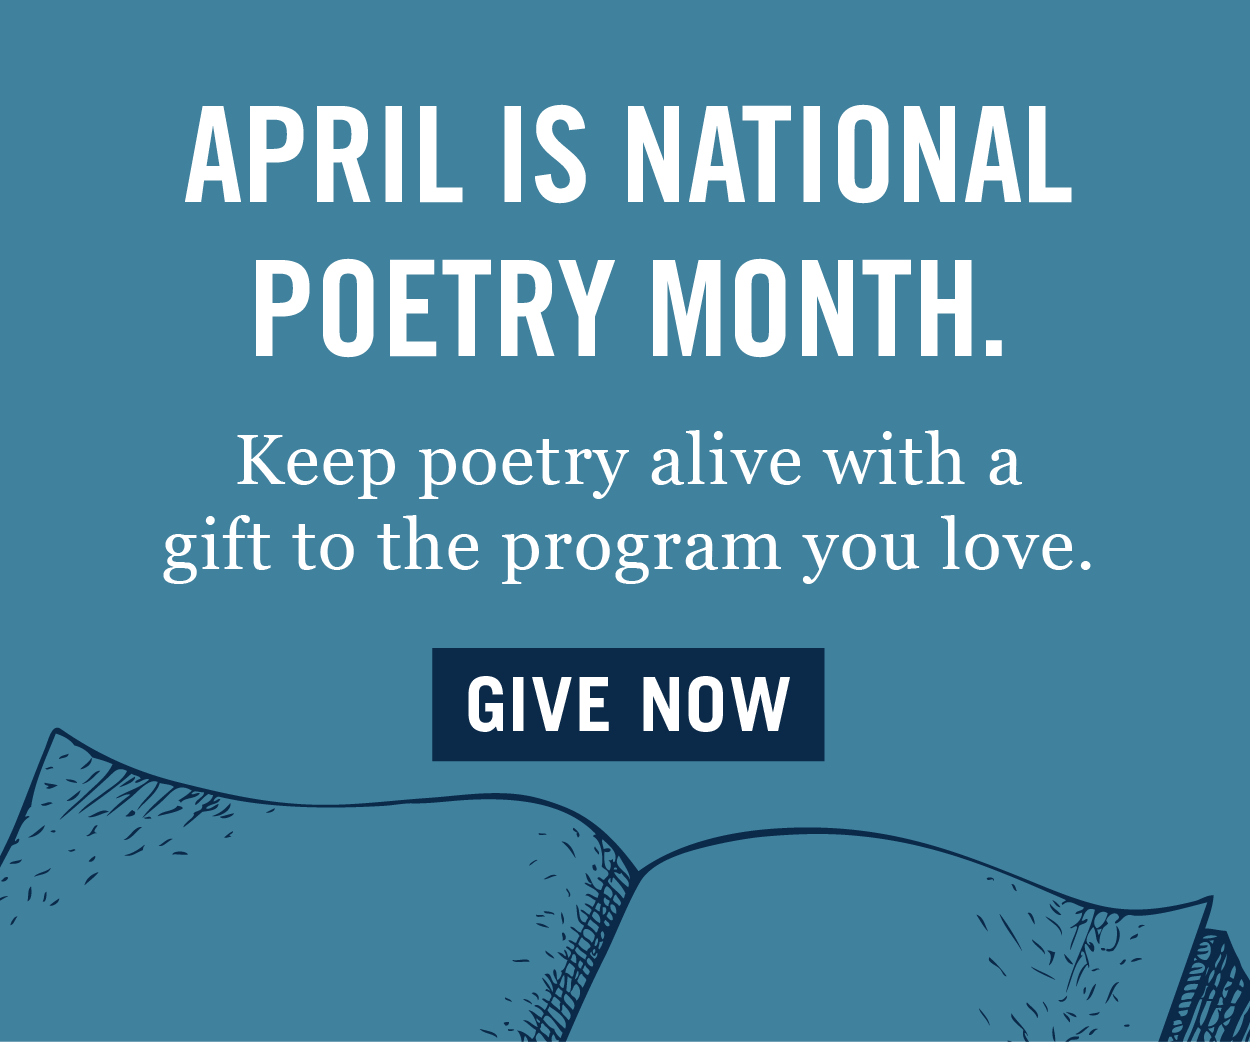 April is National Poetry Month - Keep poetry alive with a gift to the program you love - Give now